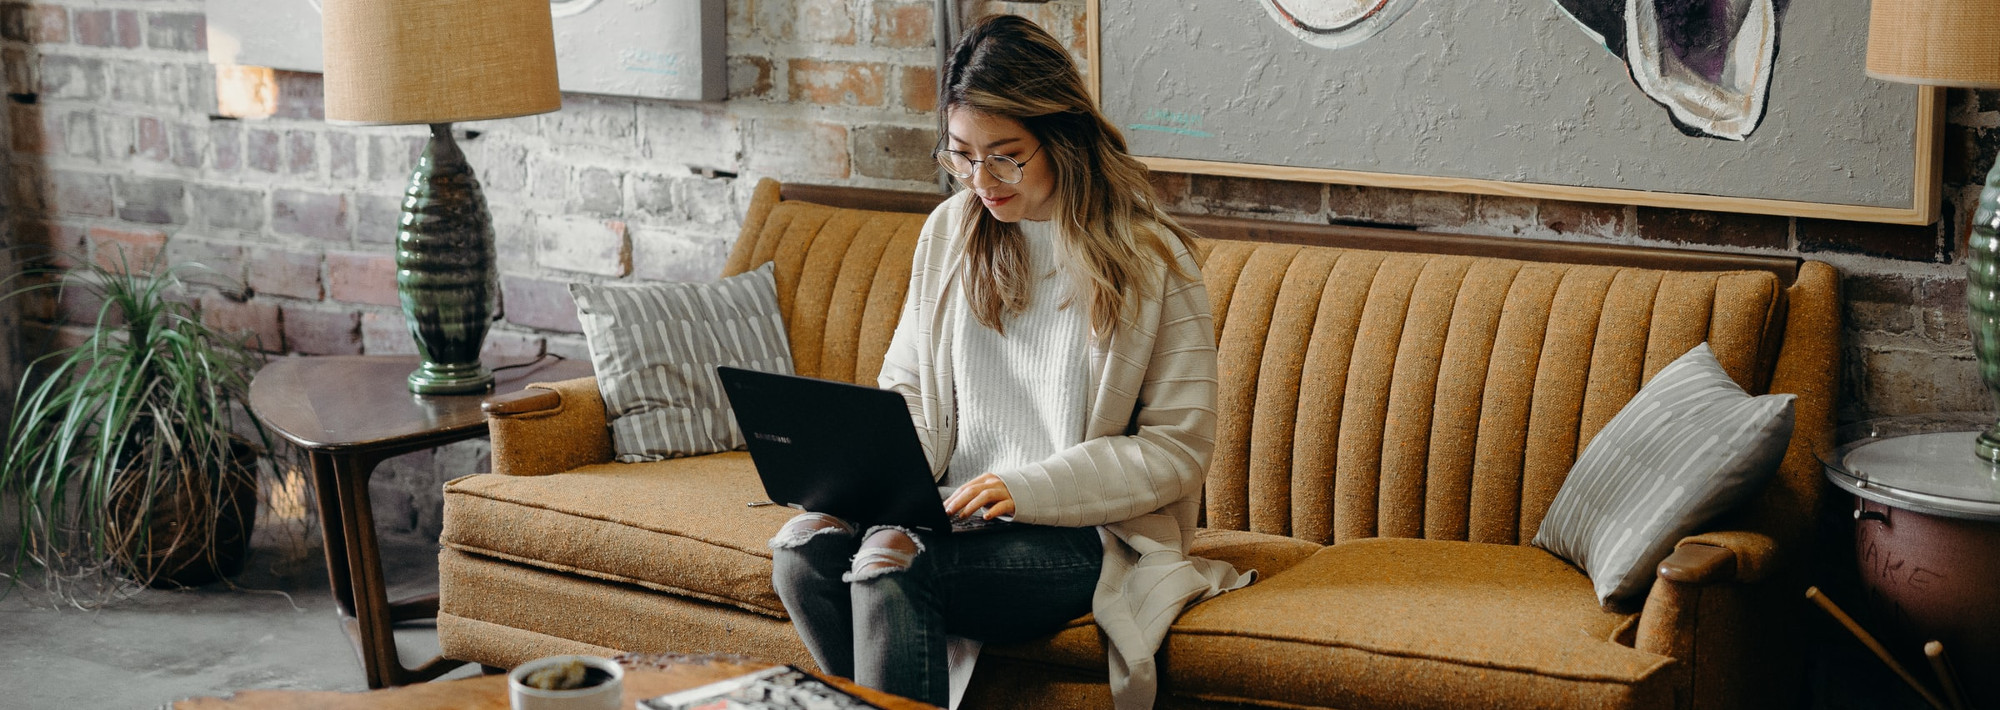 A woman sitting on a couch, working on a laptop